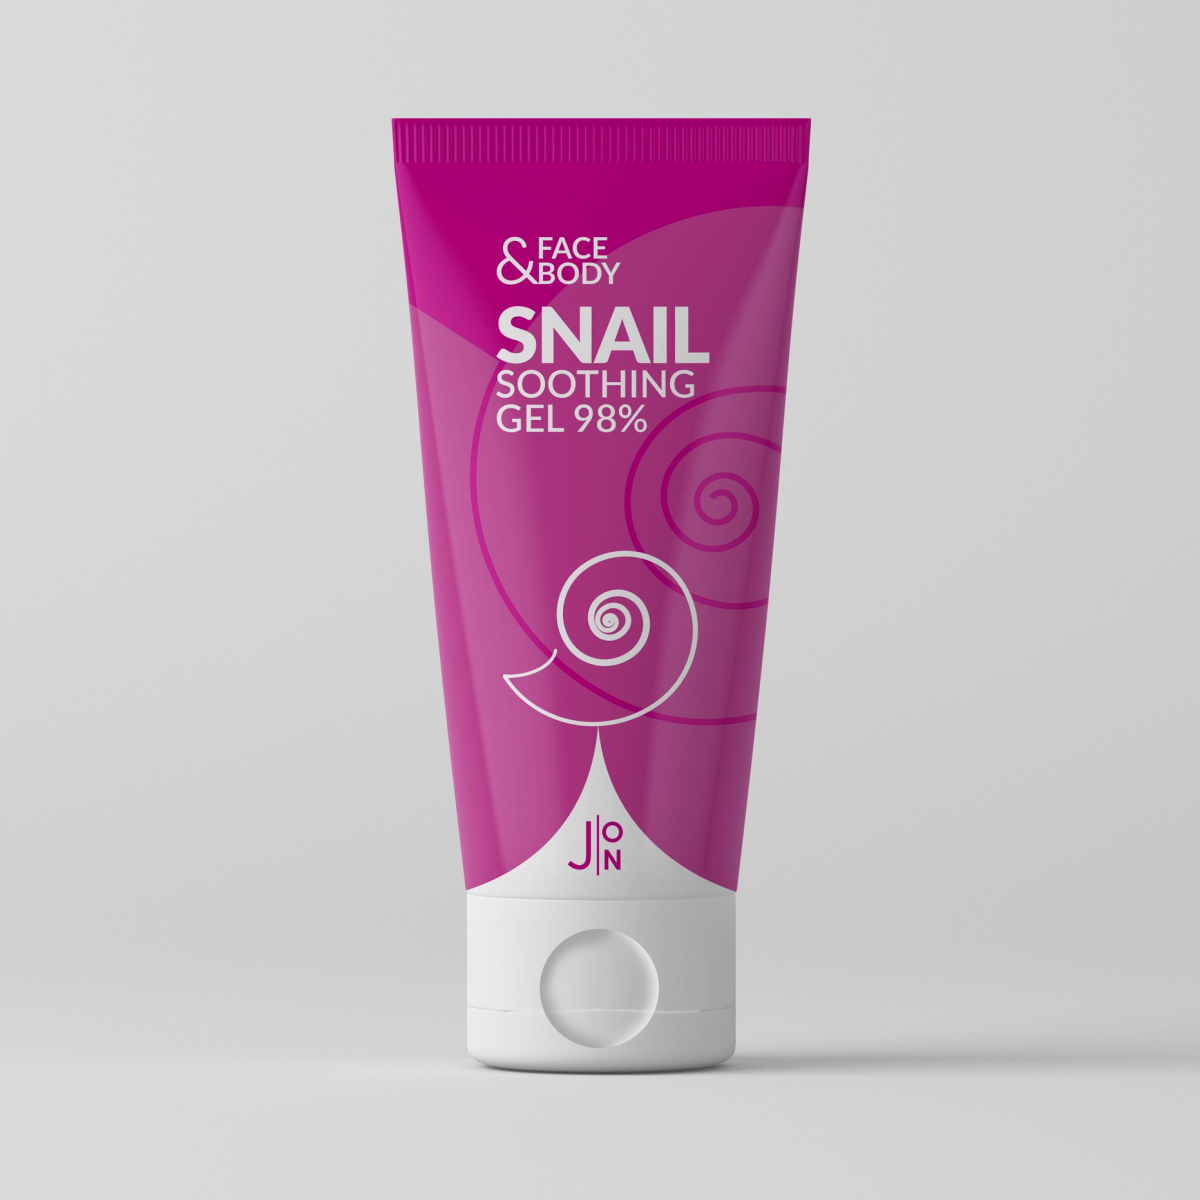 Face & Body Snail Soothing Gel 98% [J:ON]